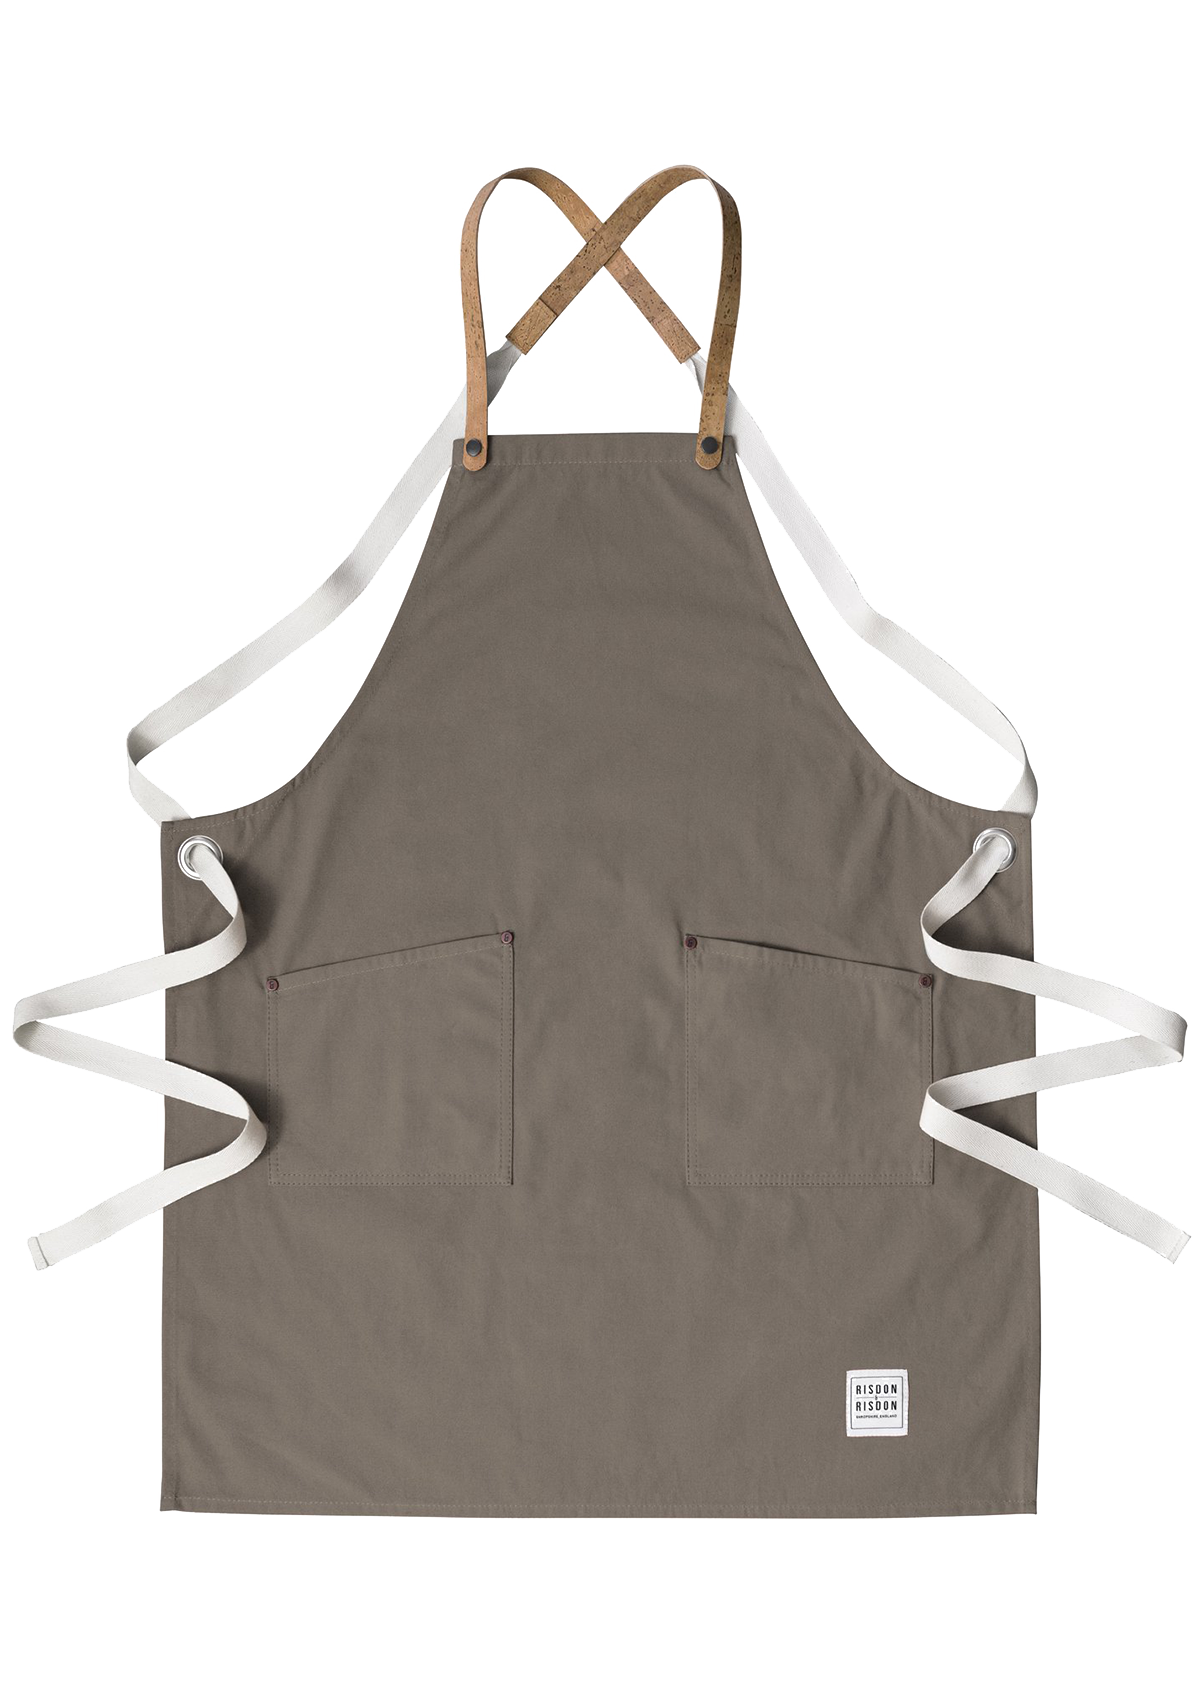 Handcrafted Apron Studio with Cork Straps